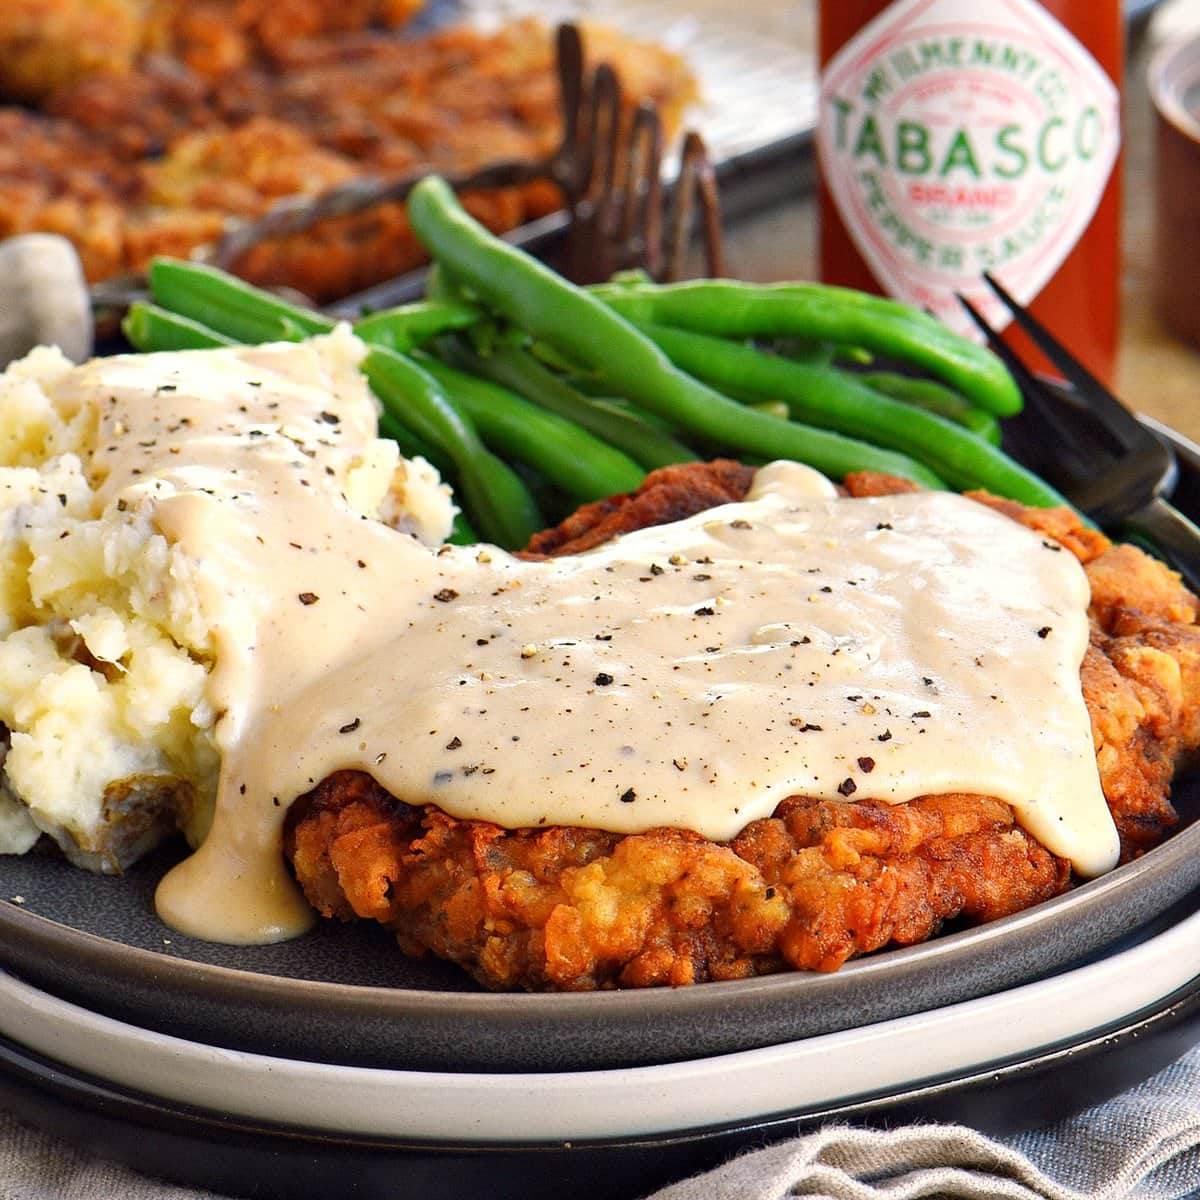 https://www.momontimeout.com/wp-content/uploads/2019/06/chicken-fried-steak-recipe-with-gravy-on-plate-square.jpeg